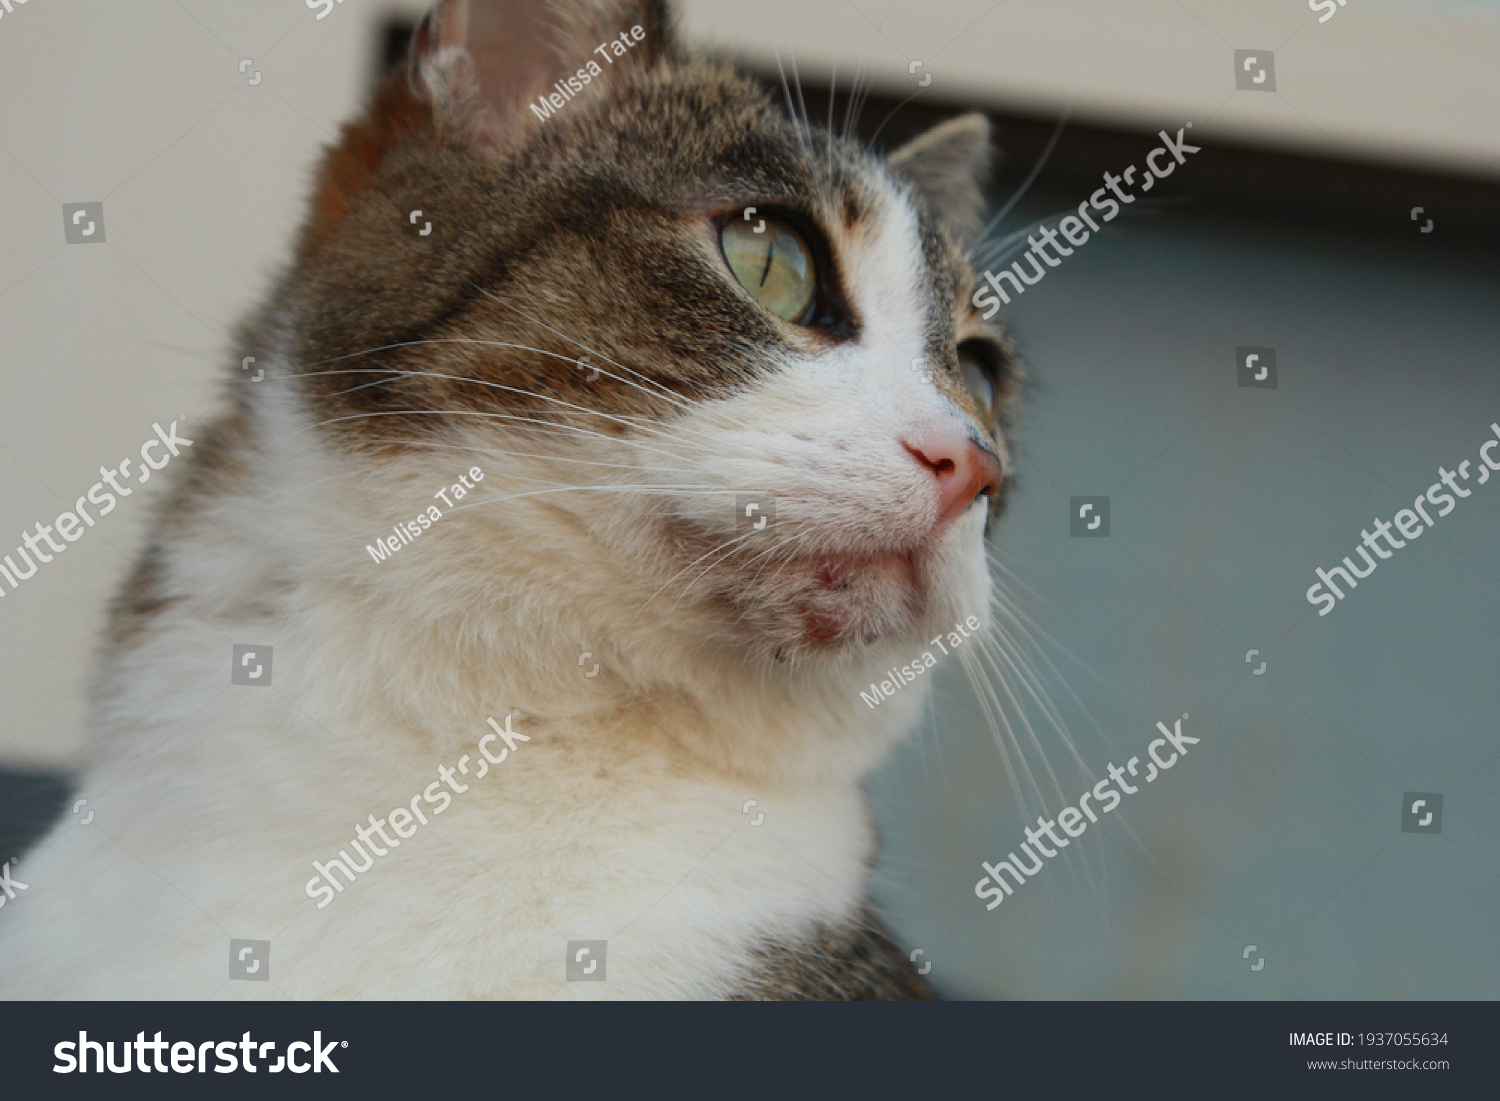 Chin of a house cat with acne #1937055634